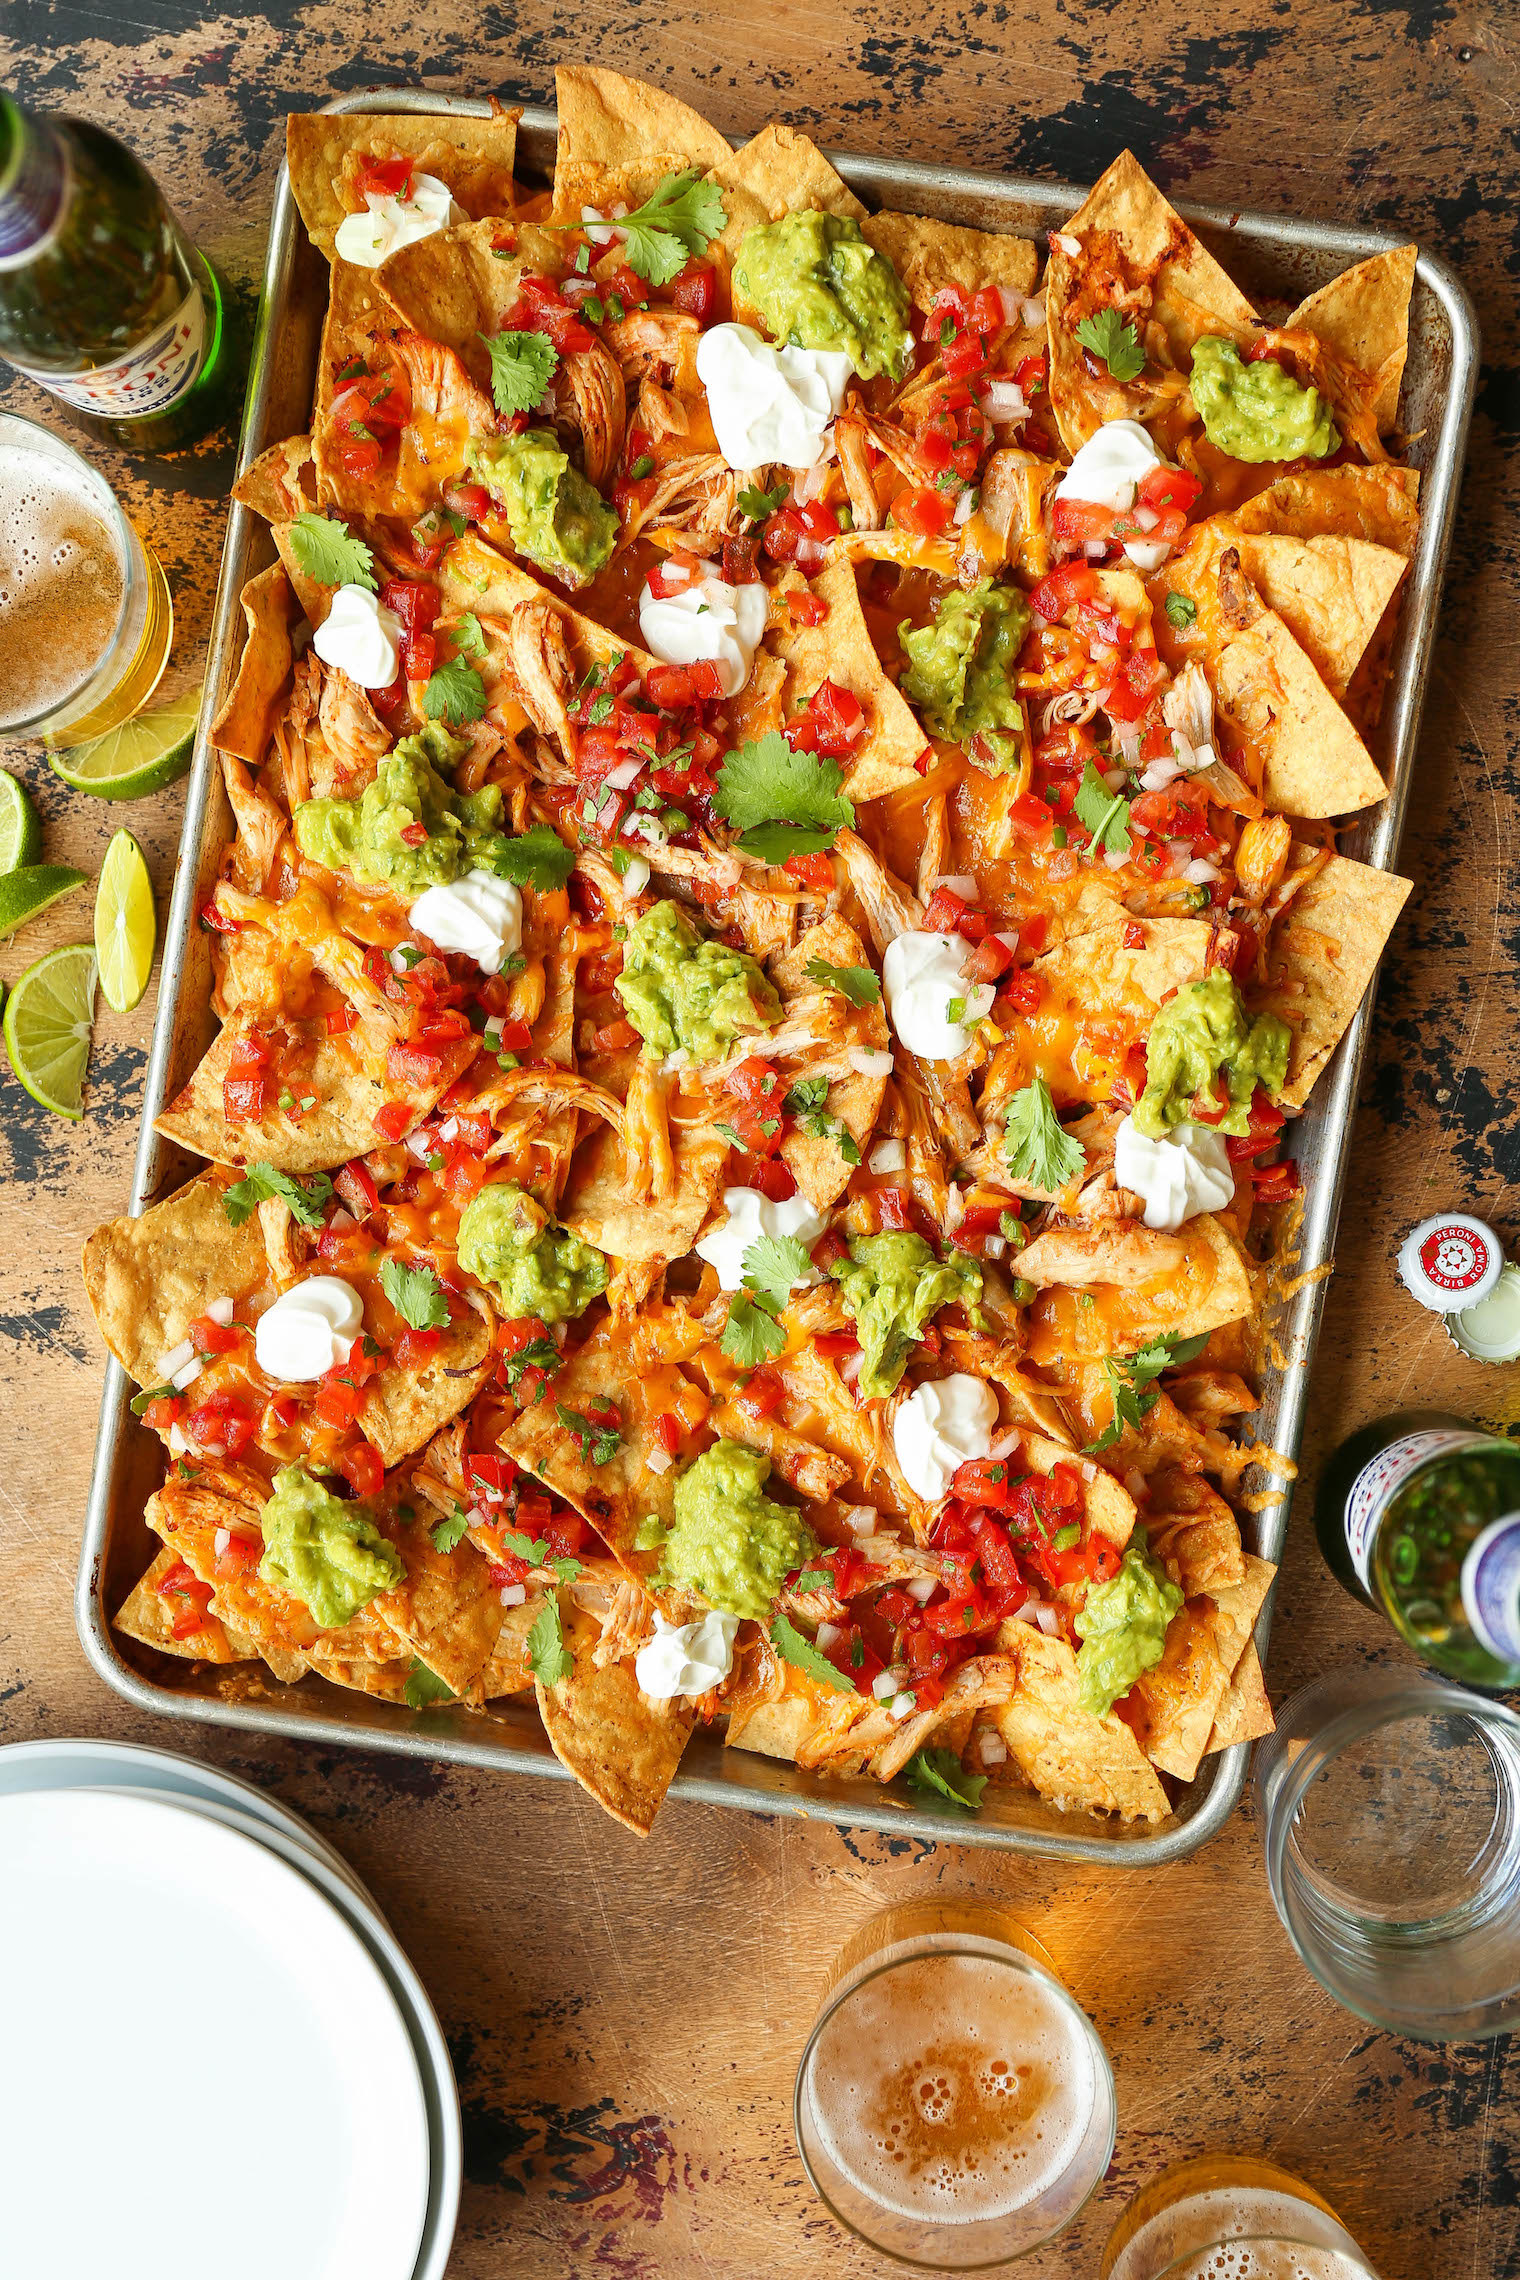 Tray of nachos topped with guacamole, sour cream and chicken